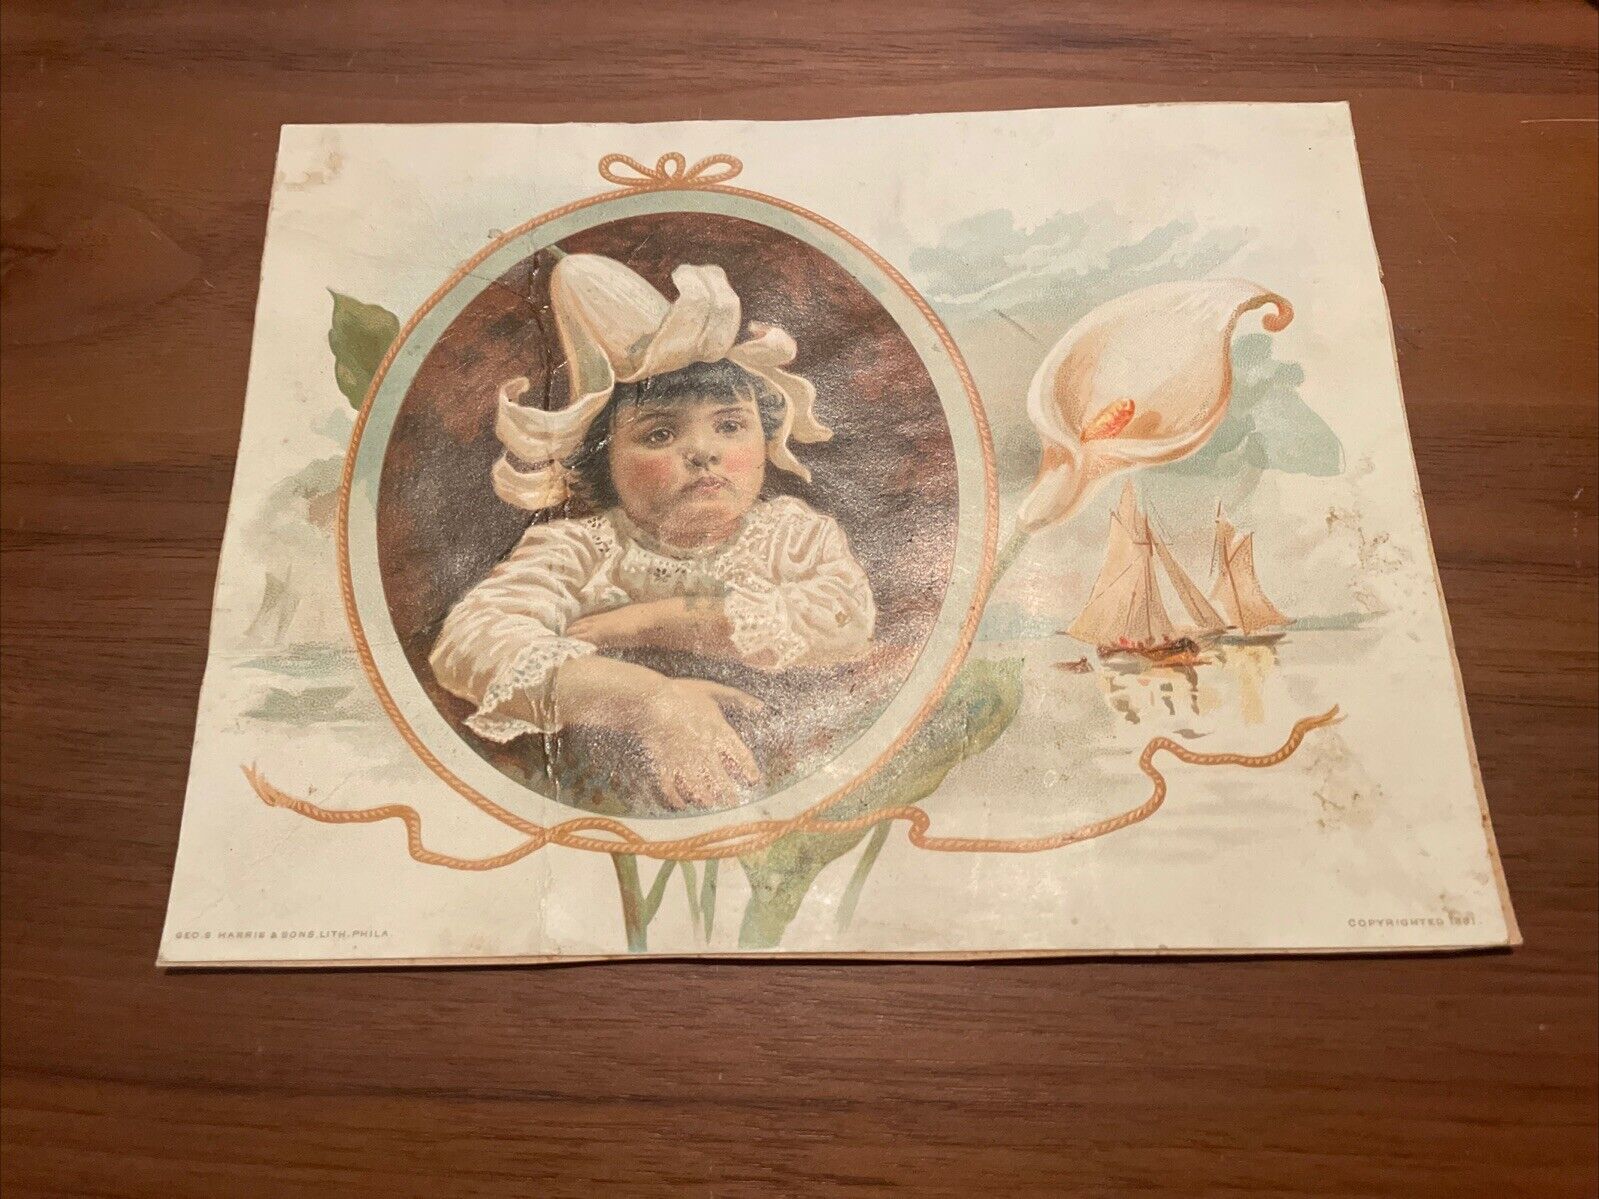 Vintage Advertising Card Of  Little Girl  7 X 5 1/2  Printed 1881